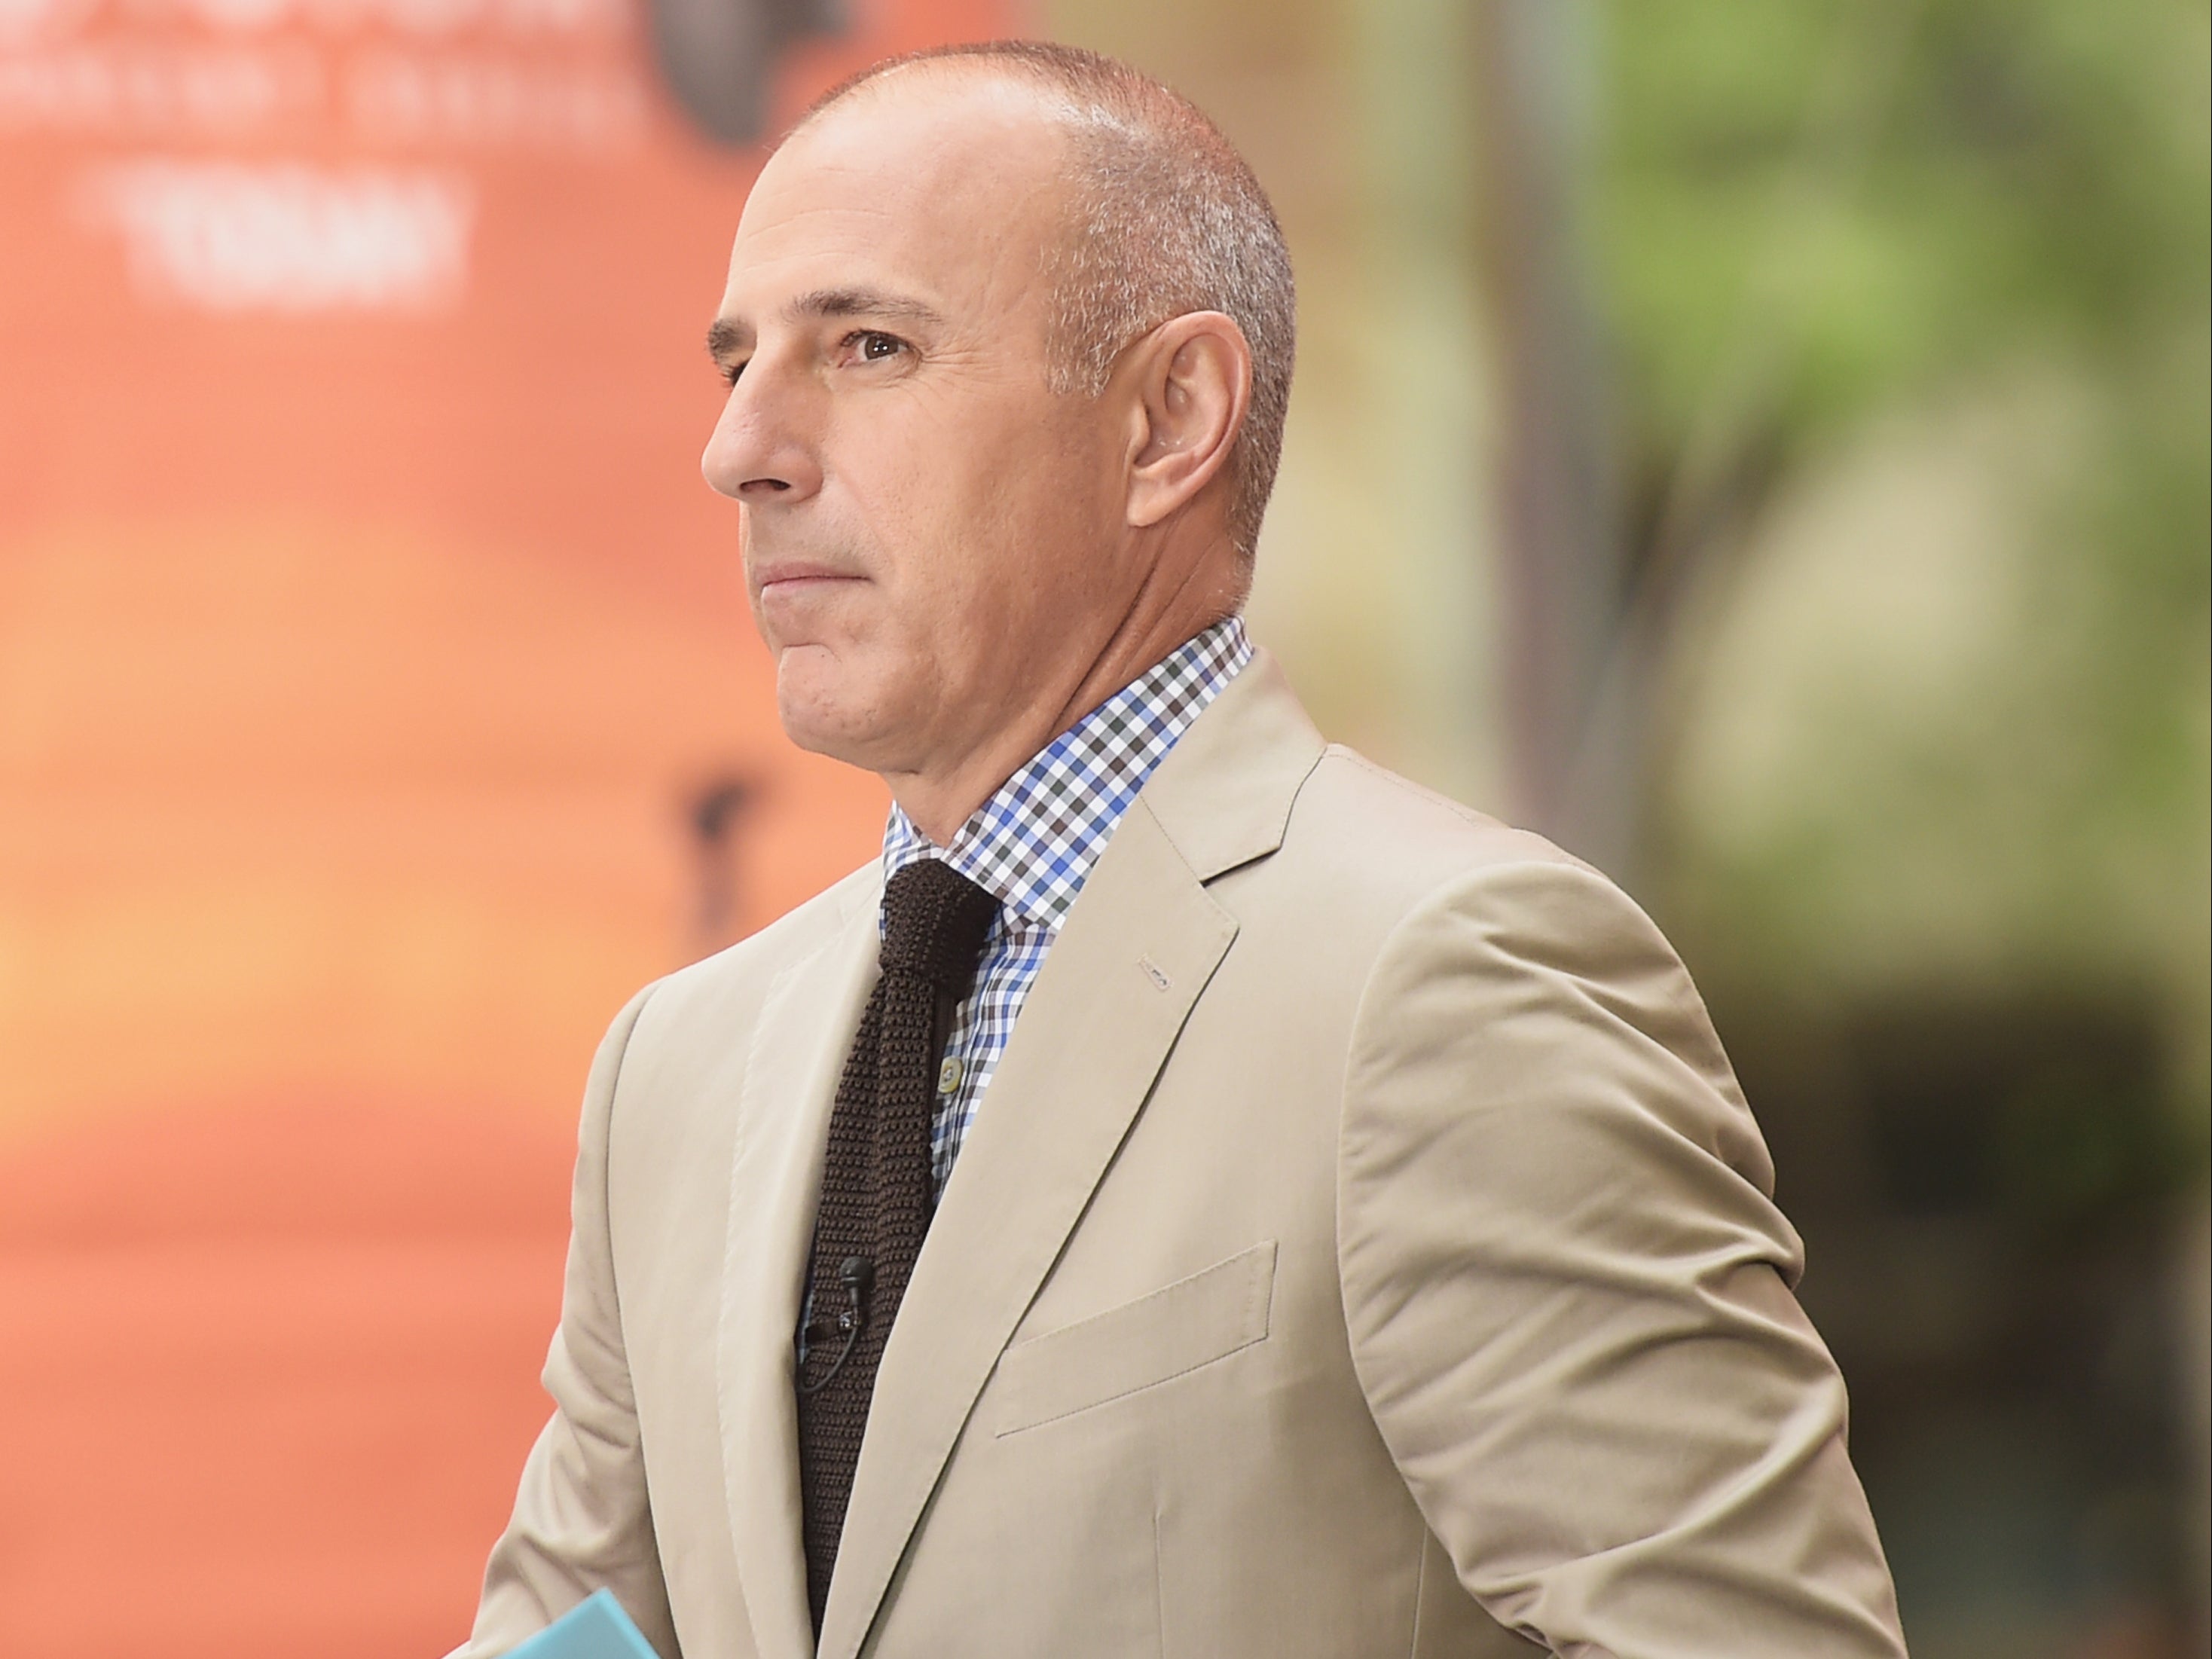 Matt Lauer on the ‘Today’ show on 22 August 2014 in New York City